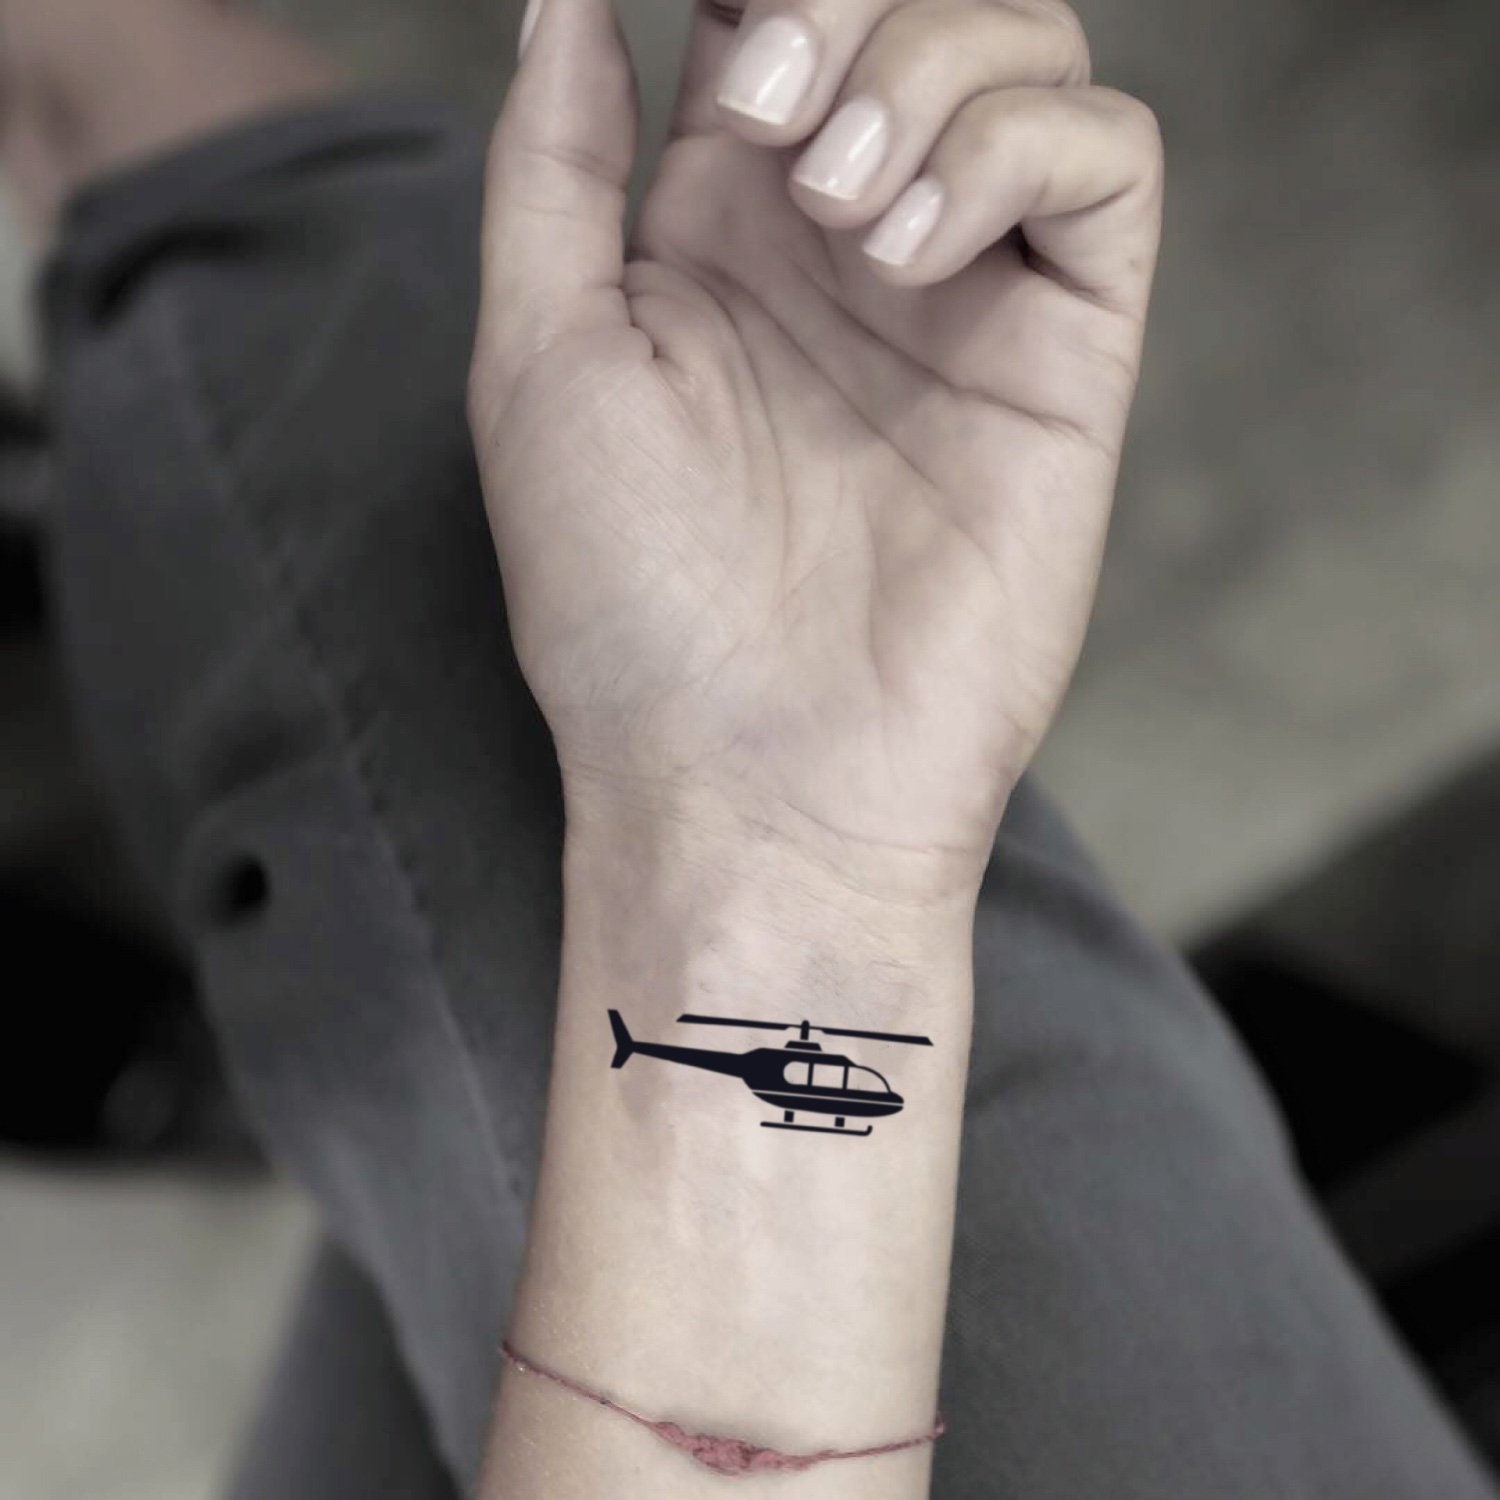 526 Helicopter Tattoo Images Stock Photos  Vectors  Shutterstock